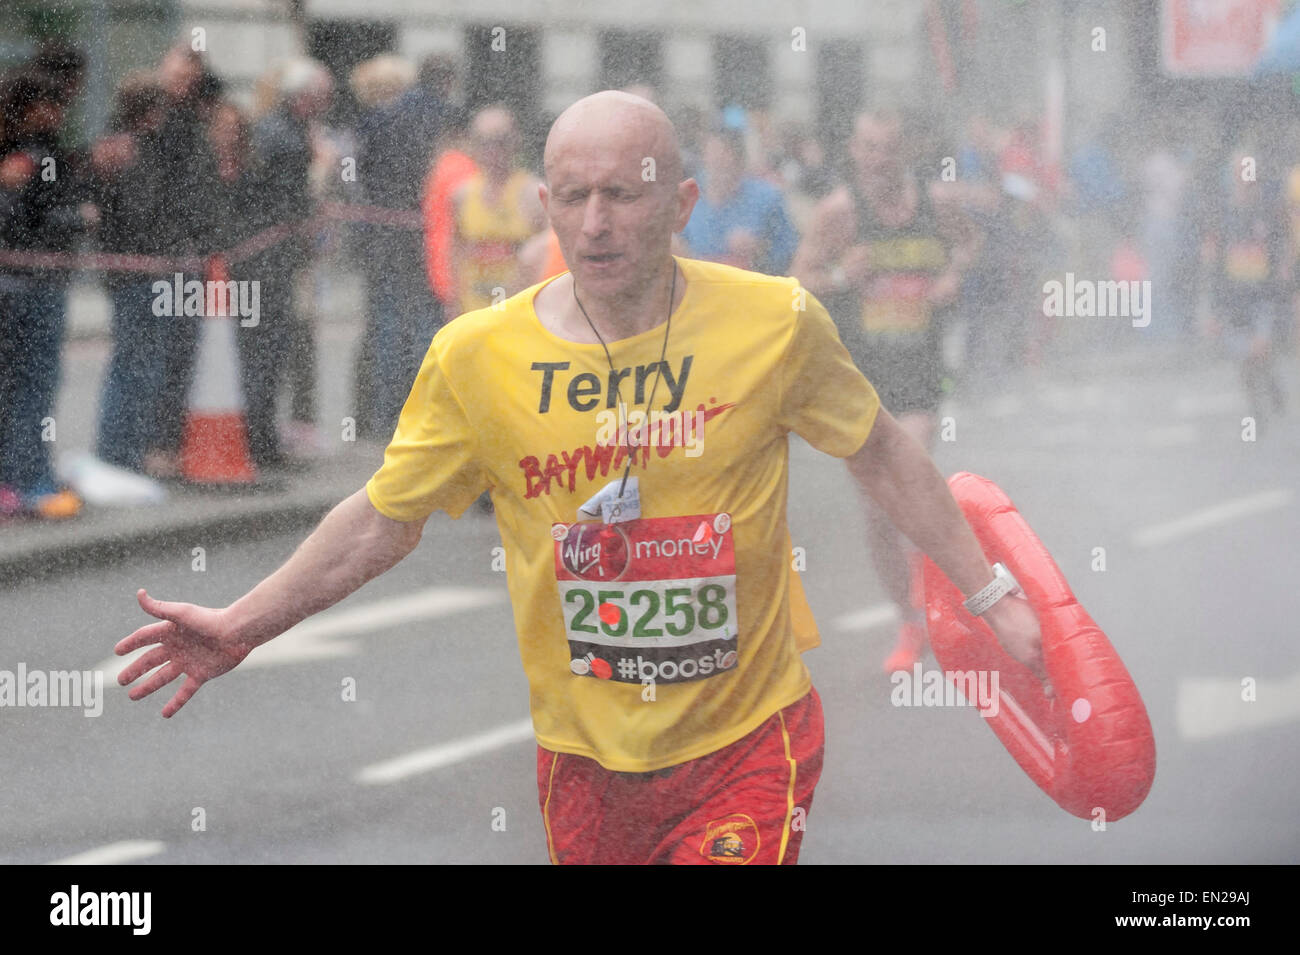 London, UK. 26 April 2015. A runner passes by a roadside shower with two miles to go as nearly 38,000 runners took part in the Virgin Money London Marathon. Credit:  Stephen Chung / Alamy Live News Stock Photo